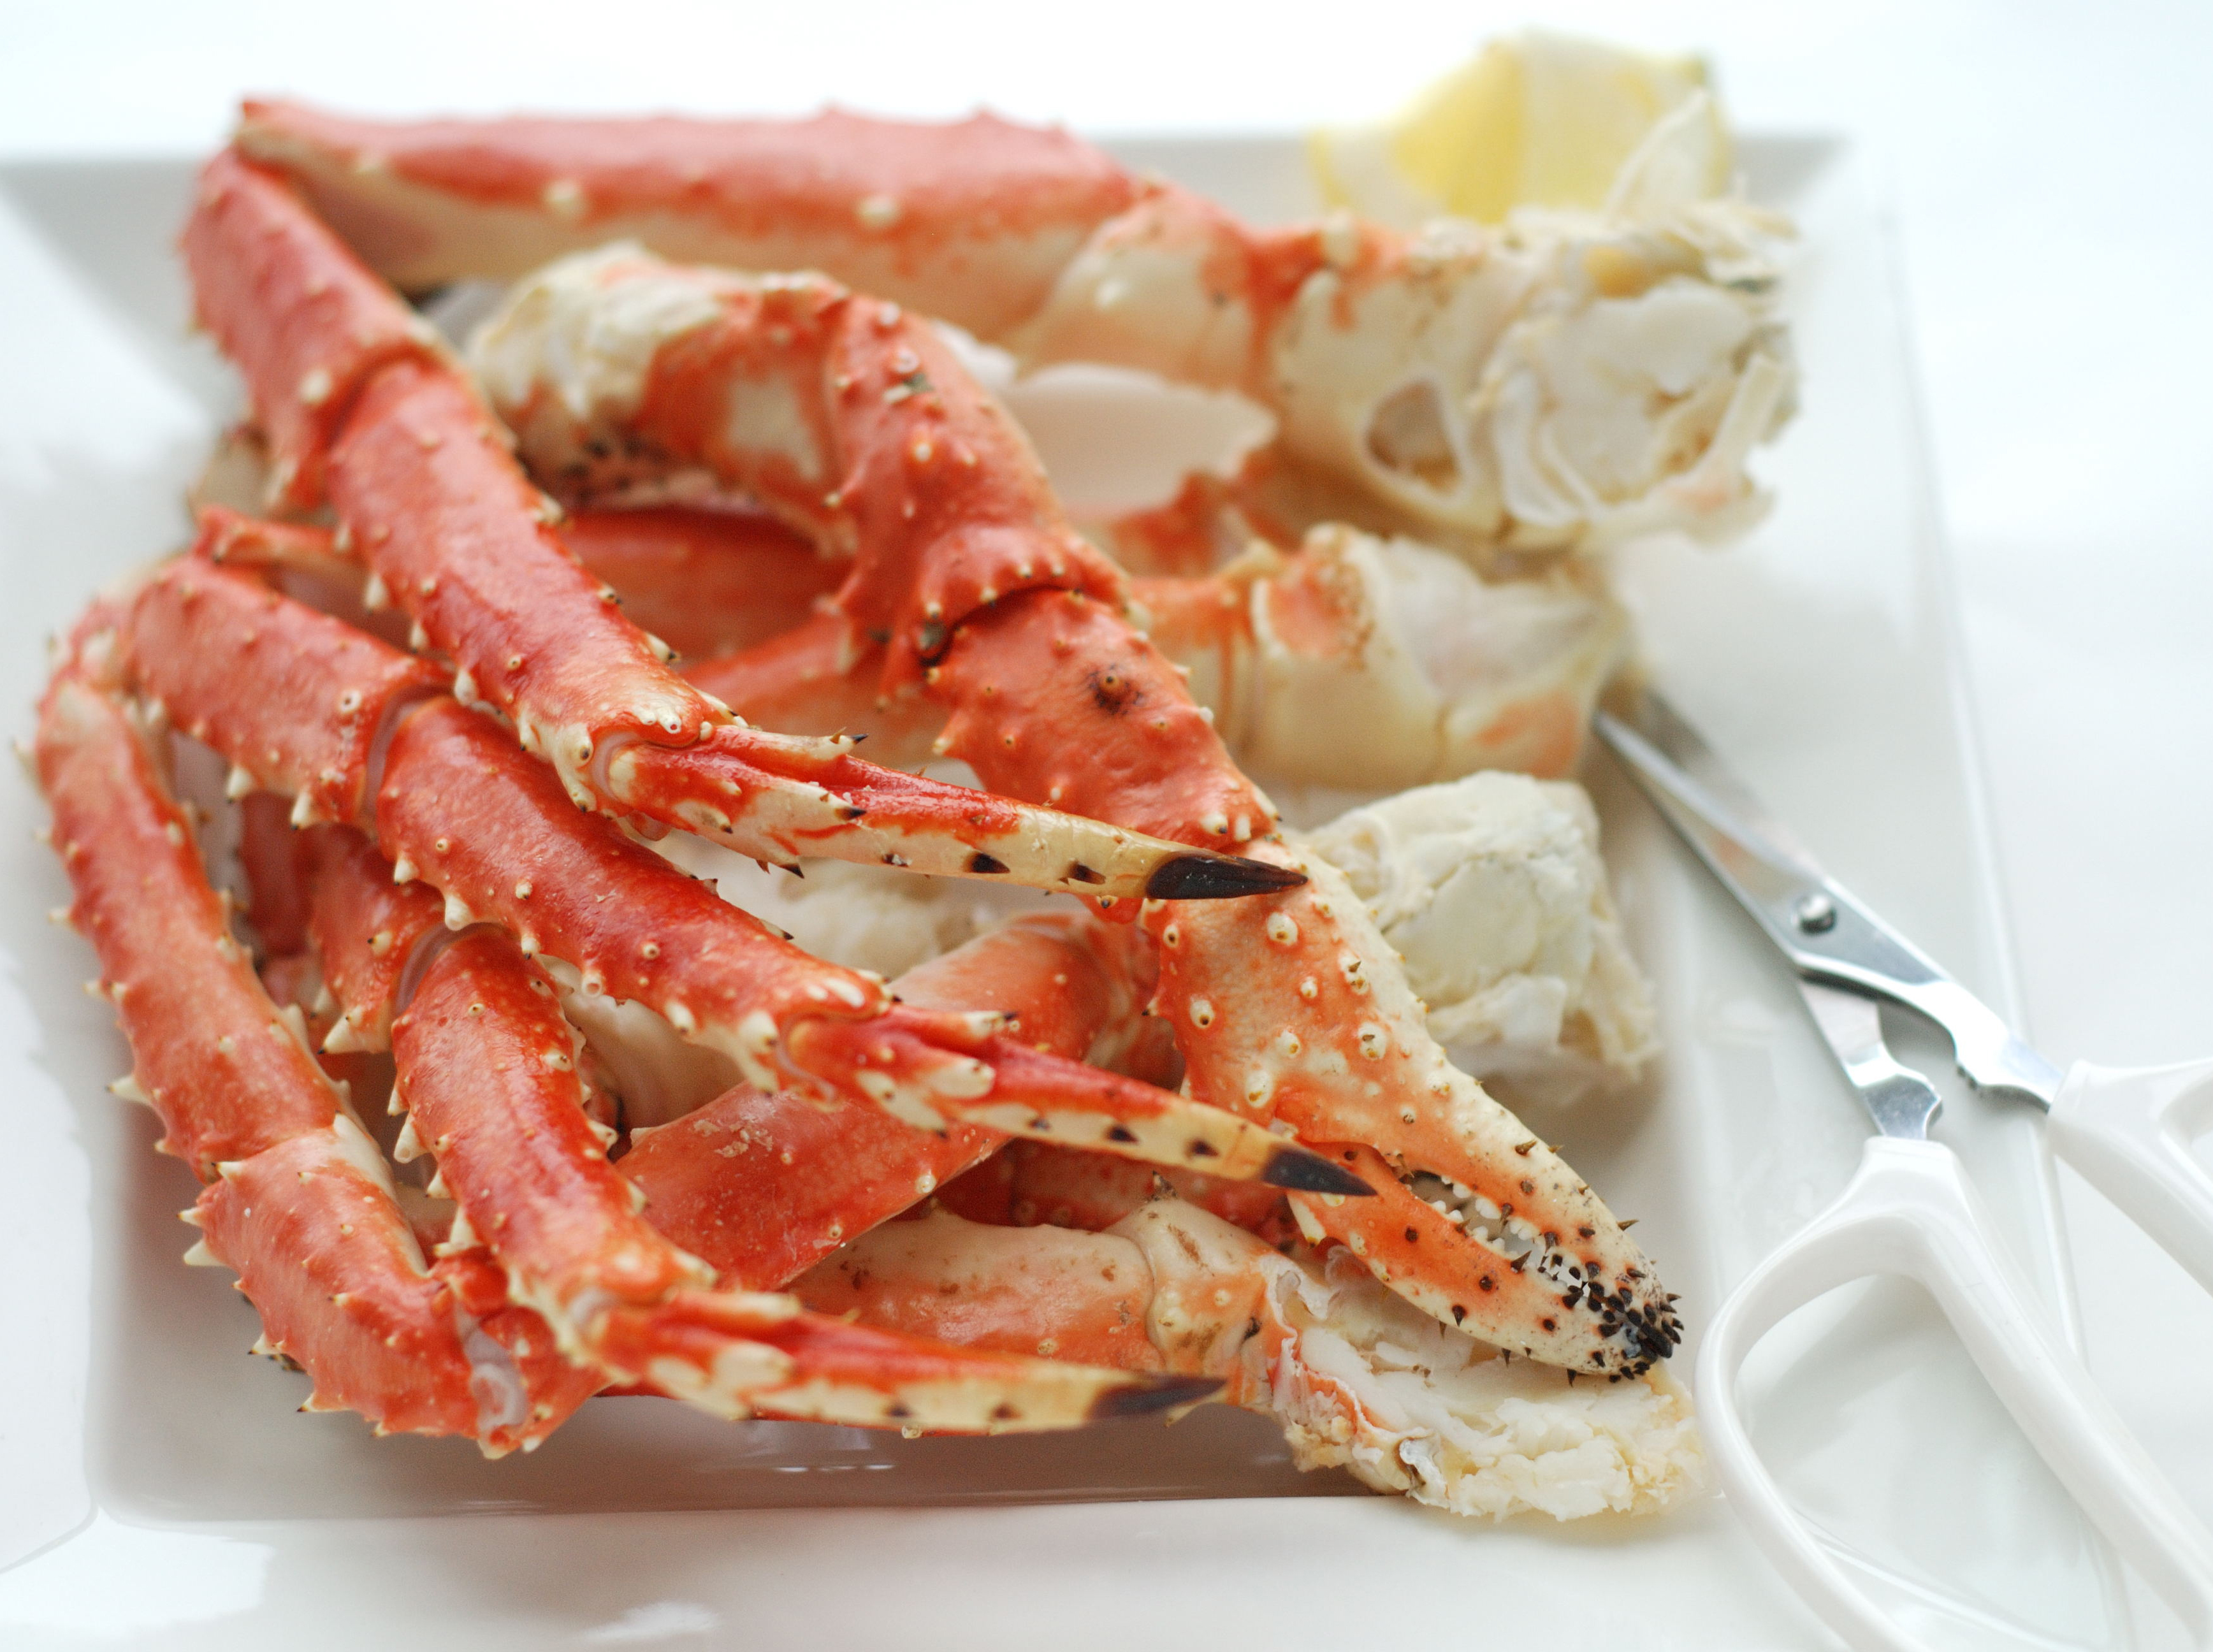 How To Reheat Crab Legs So They Stay Tender And Juicy,1 Cup To Ml Milk